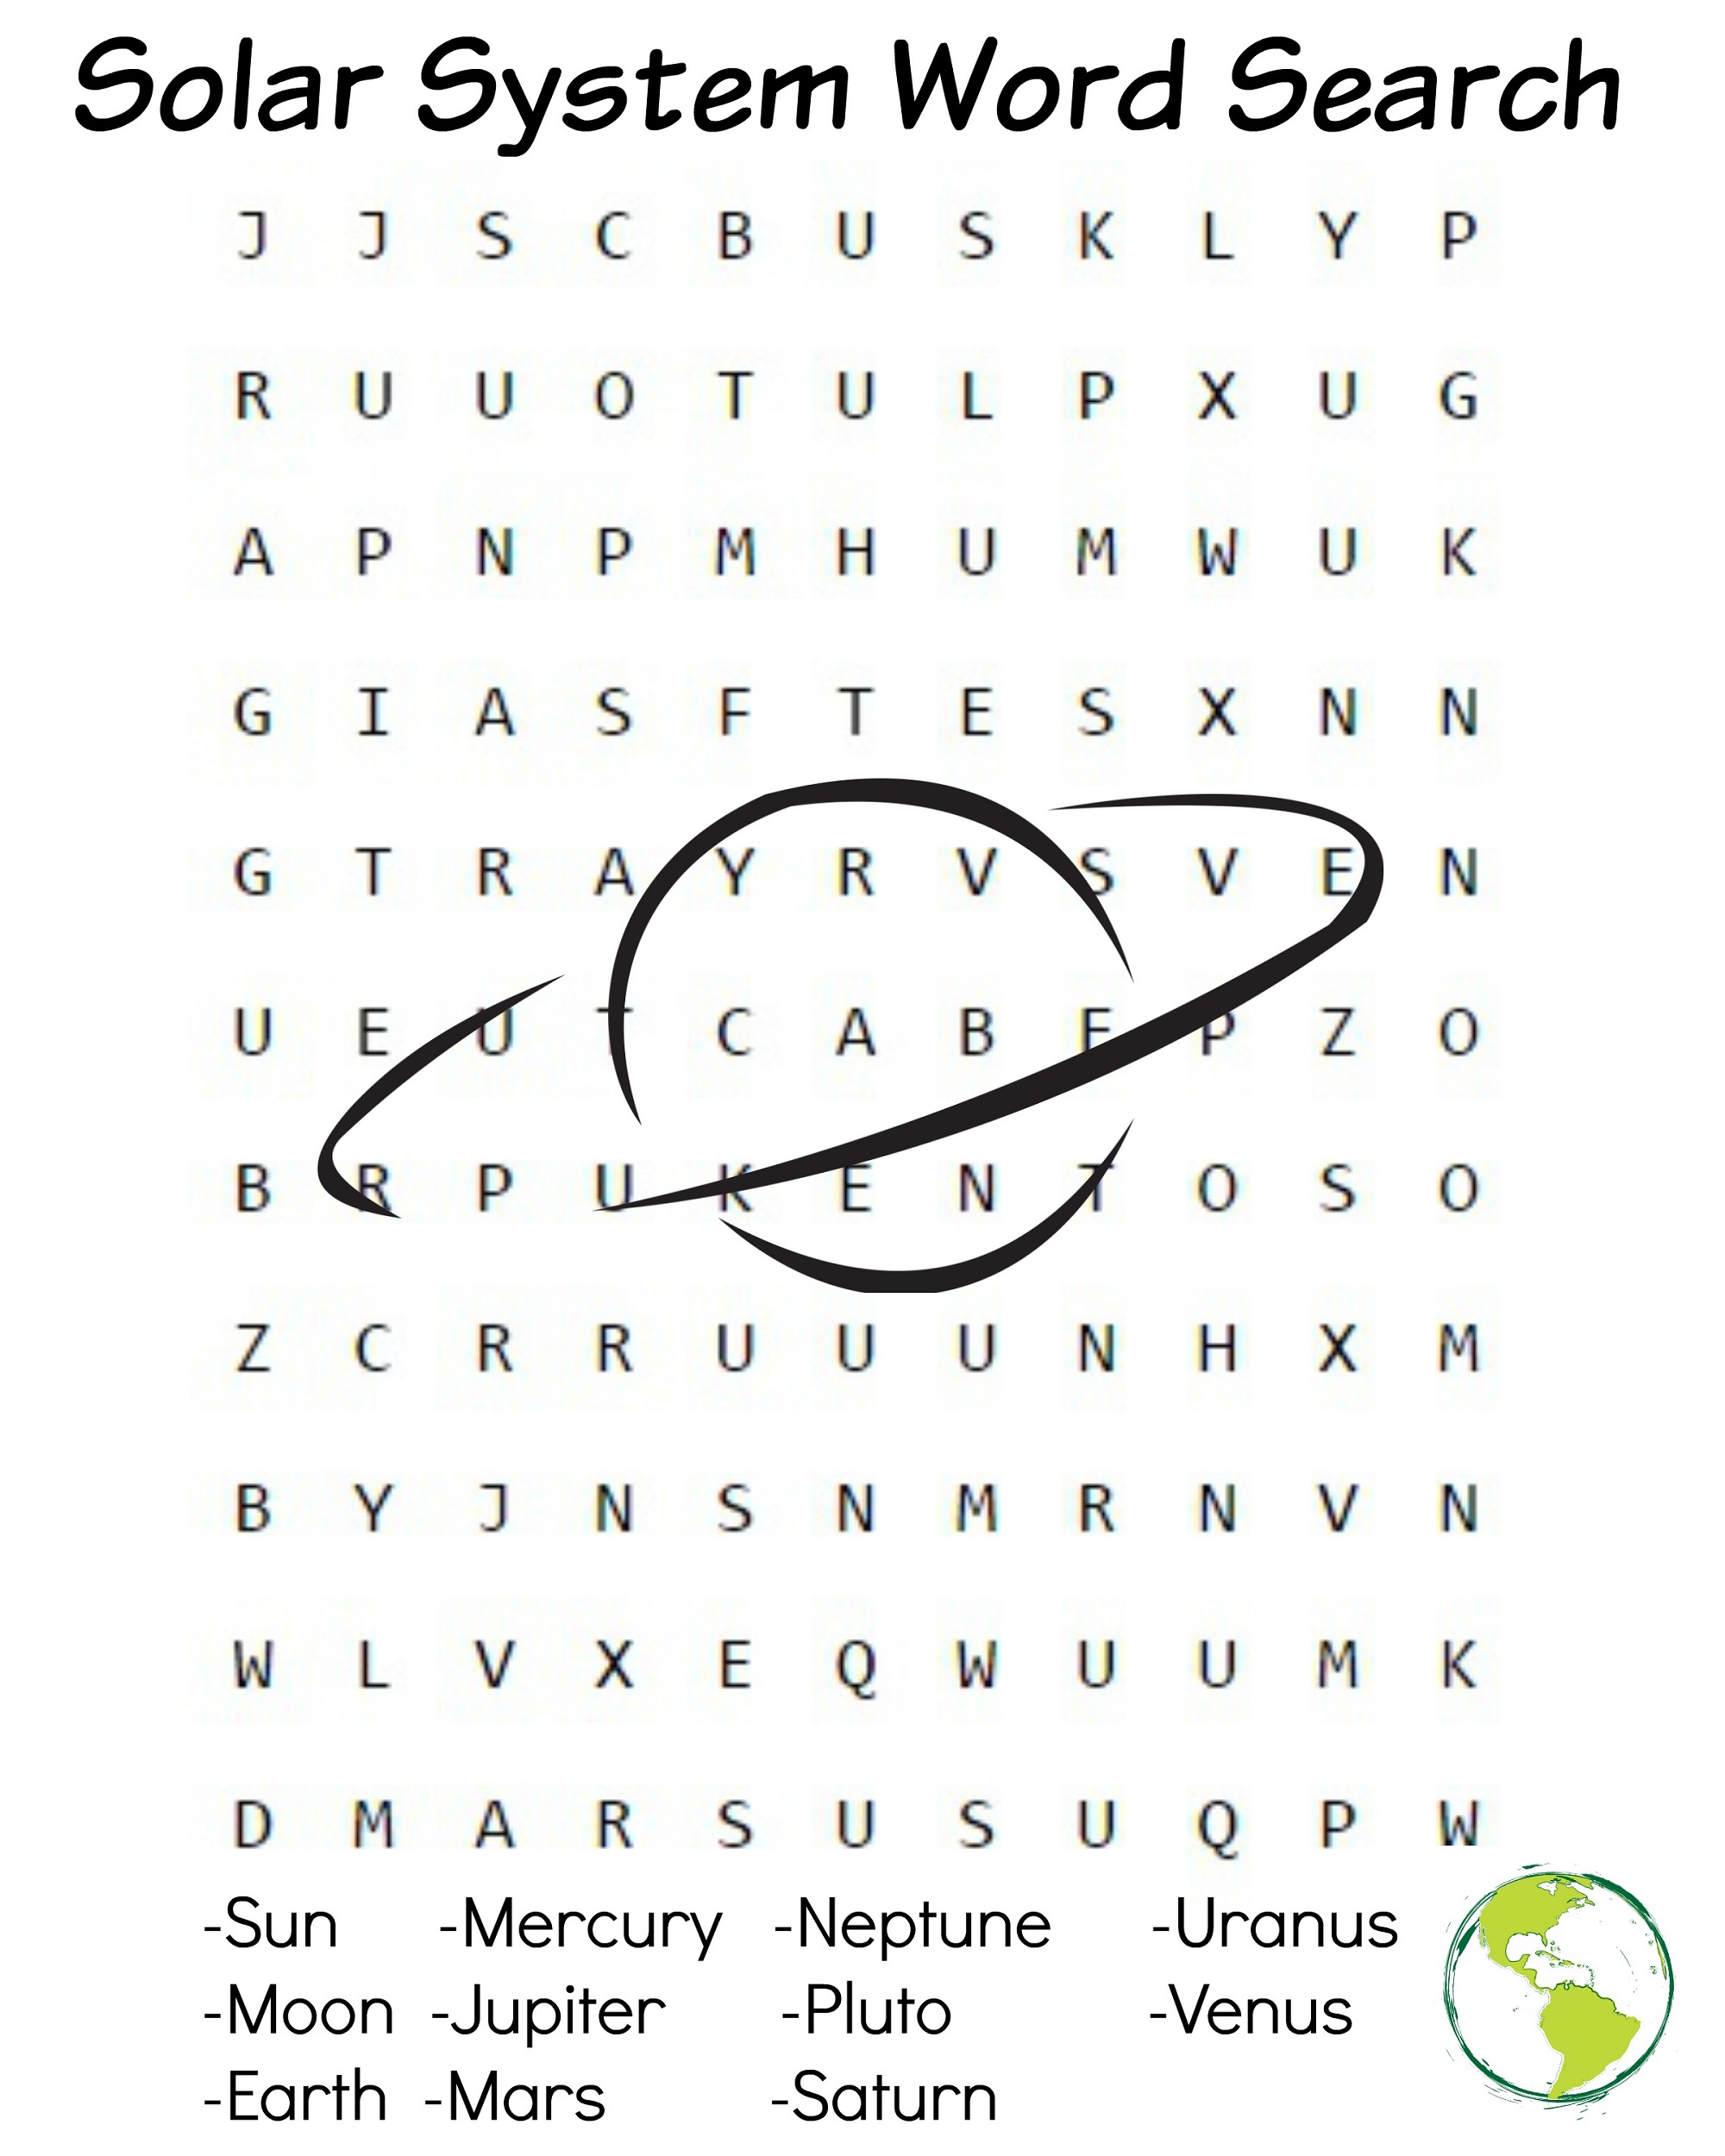 solar system wordsearch planets